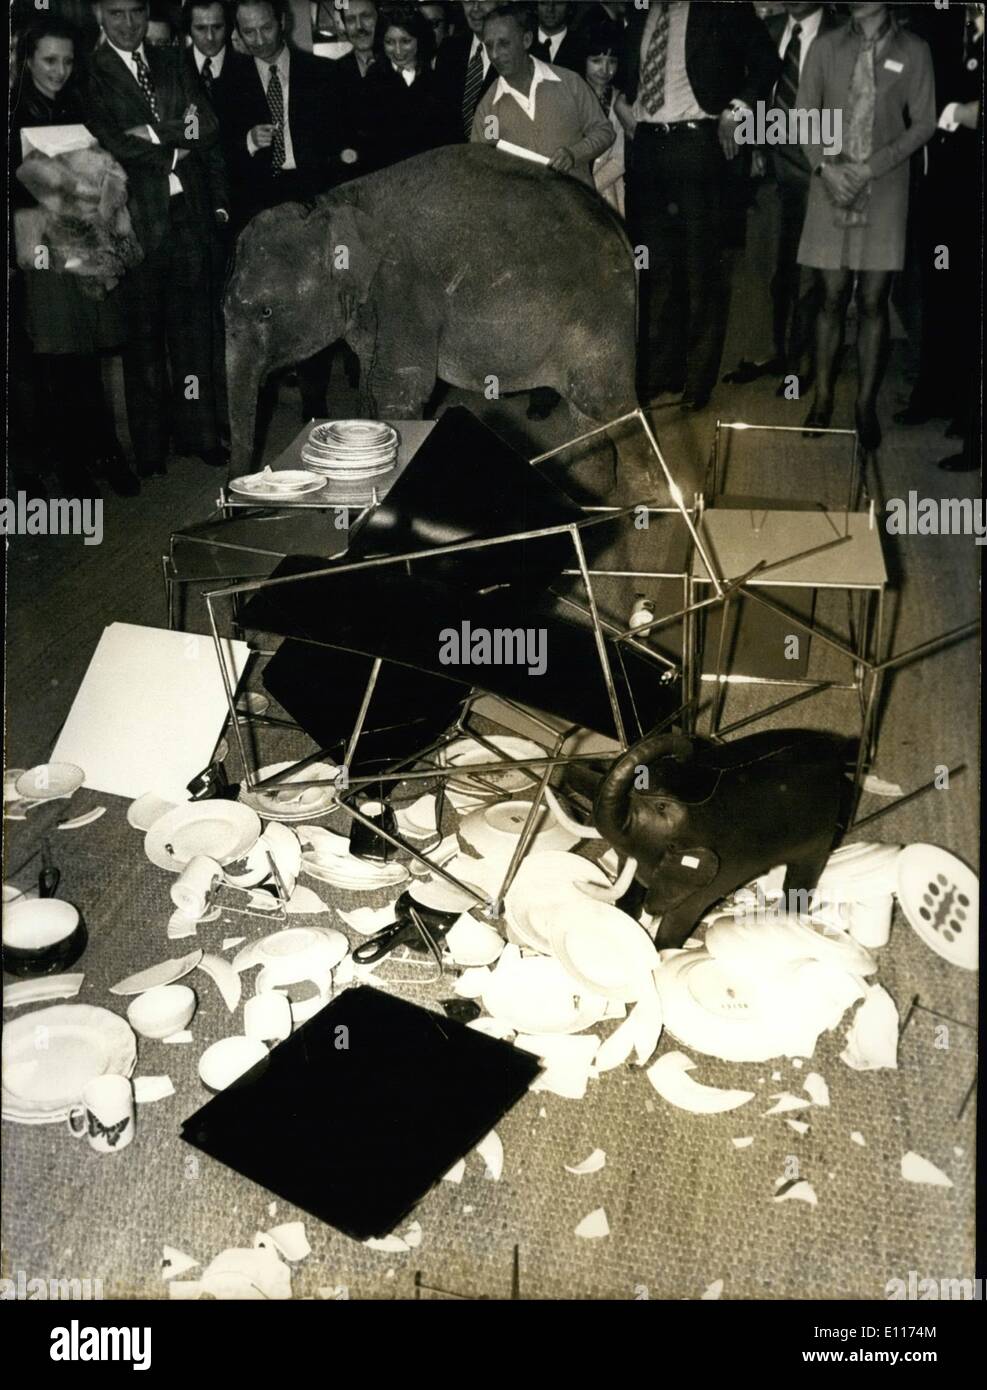 Mar. 03, 1976 - Elephant in China Shop. True to the saying, Syntho the baby elephant smashed and destroyed cups, plates, and other objects on its way around an exhibition of China, glassware etc. Now being held at the Parc Des Expositions, Paris. Syntho was specially brought from a circus to perform this publicity stunt. OPS: Syntho among the smashed Crockery. March 26/73 Stock Photo